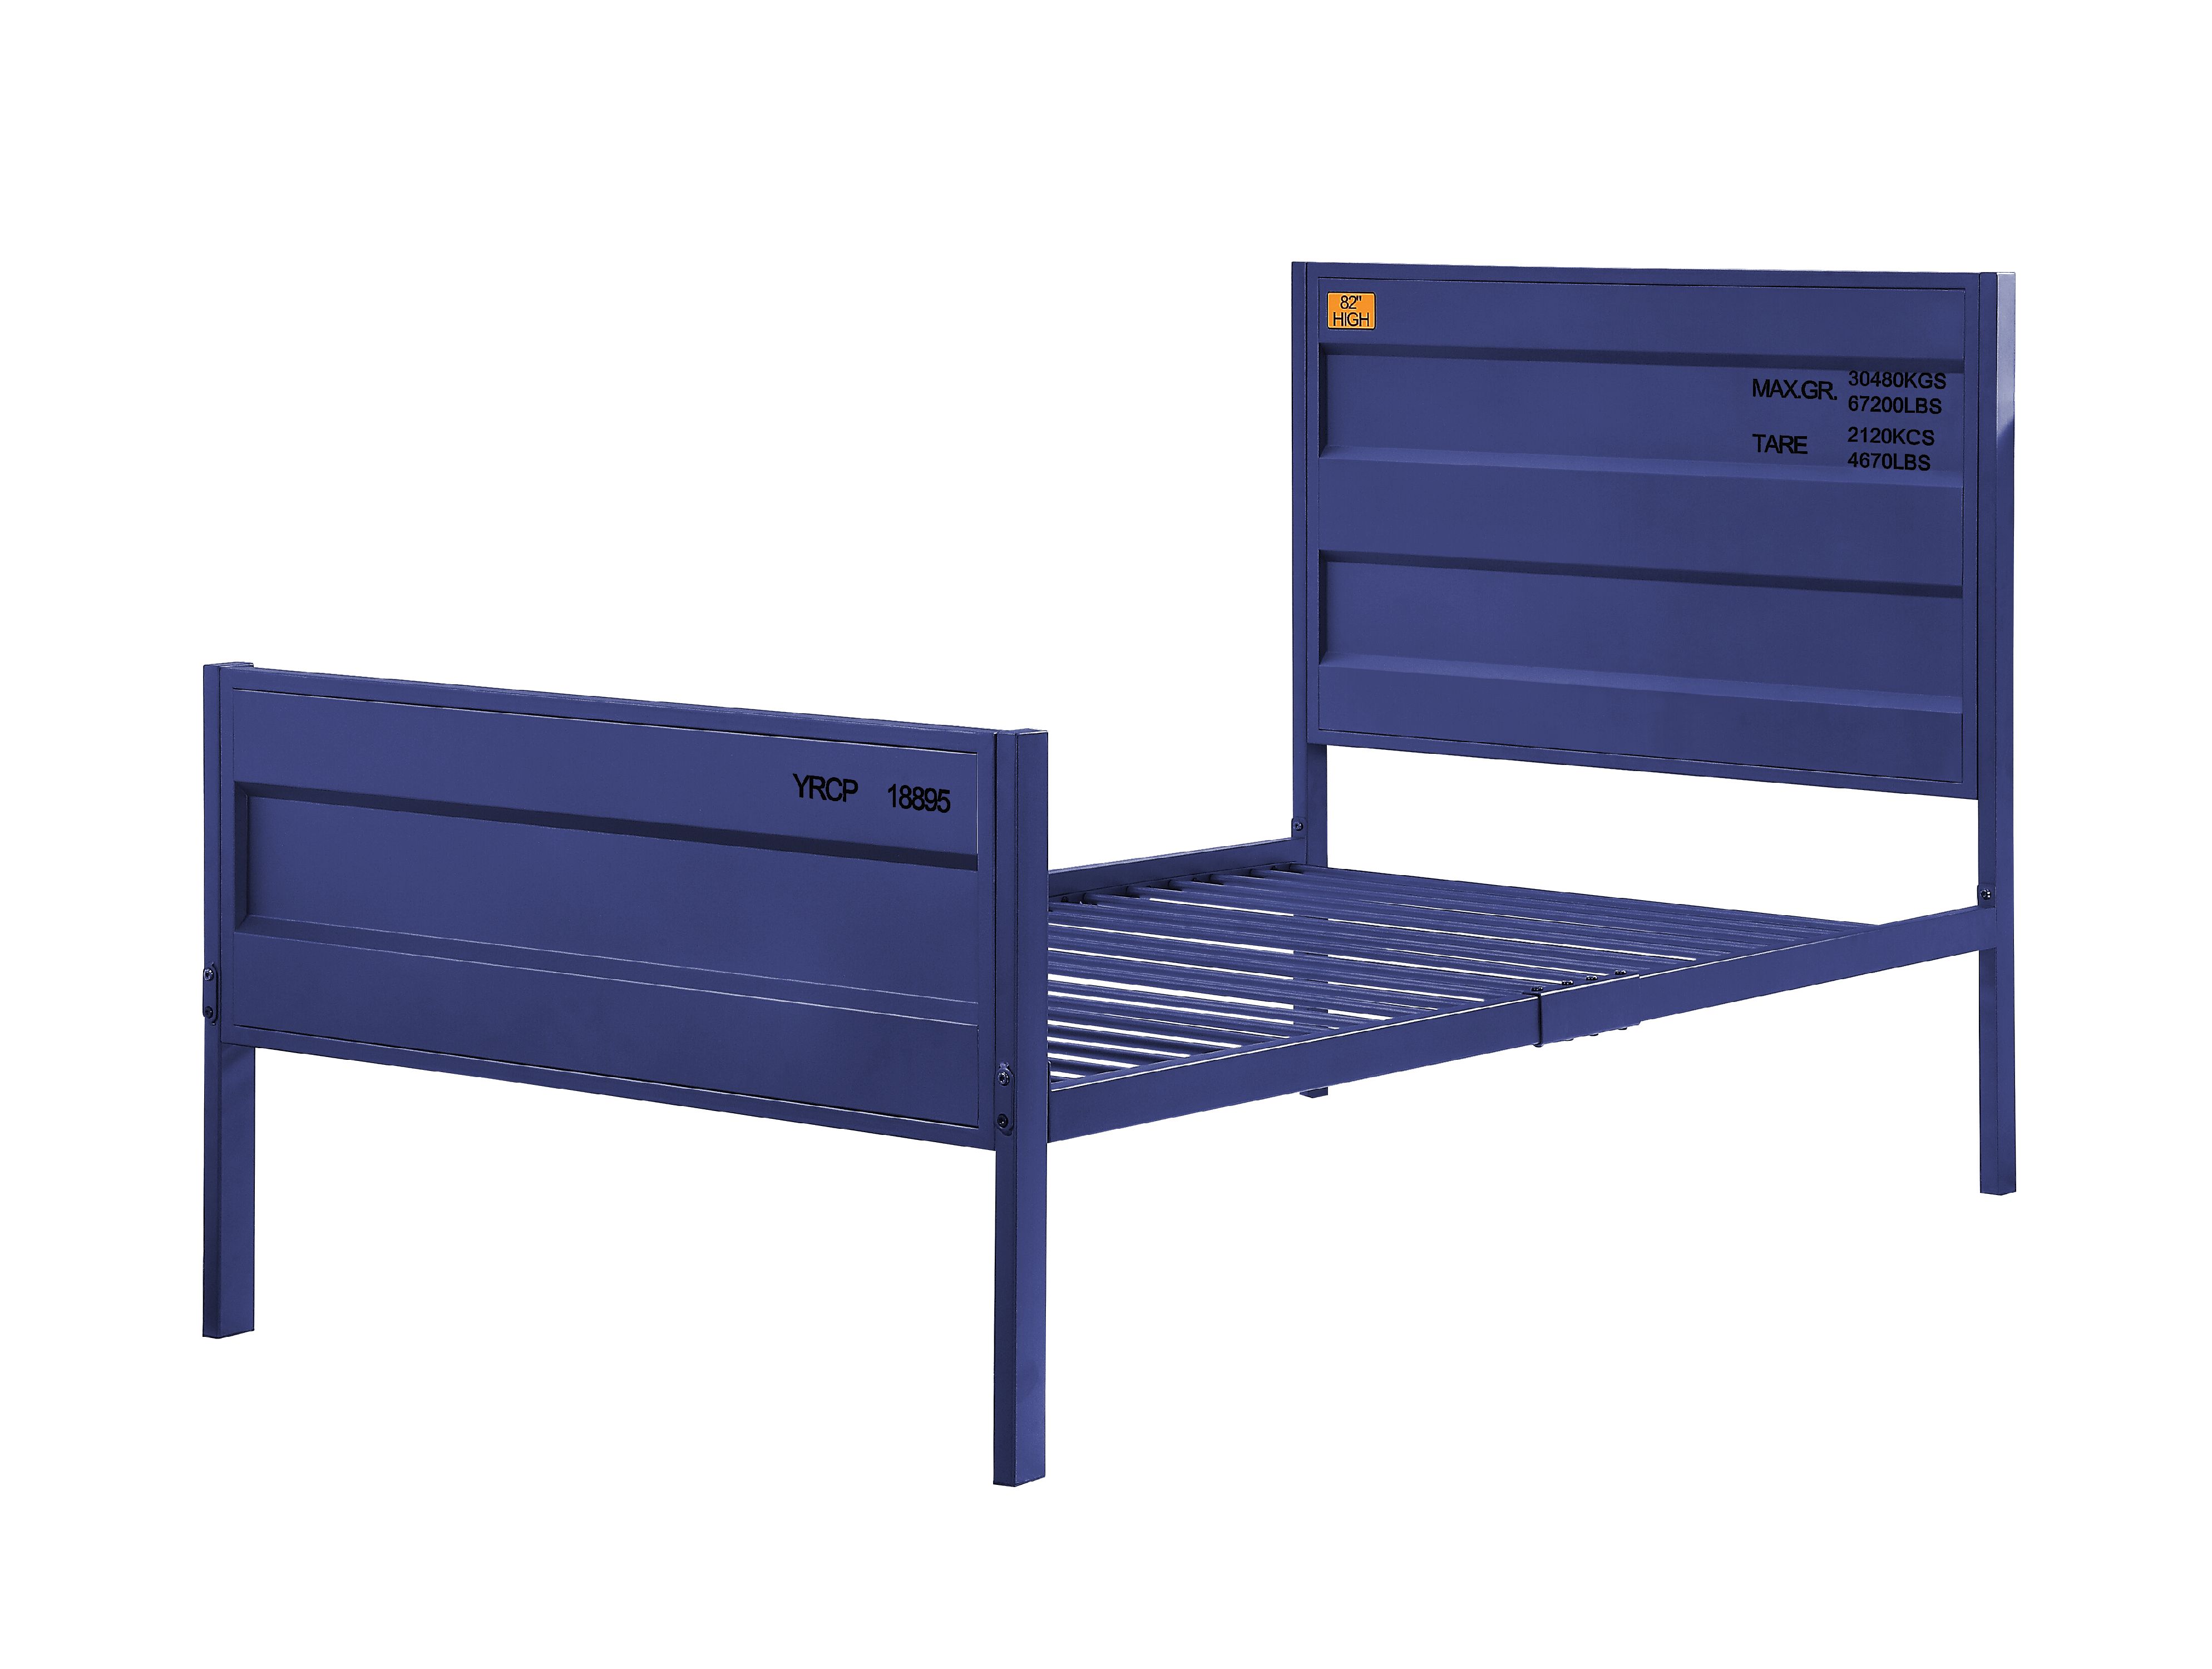 Acme Cargo Container Style Metal Panel Bed, Twin, Multiple Colors - image 1 of 4